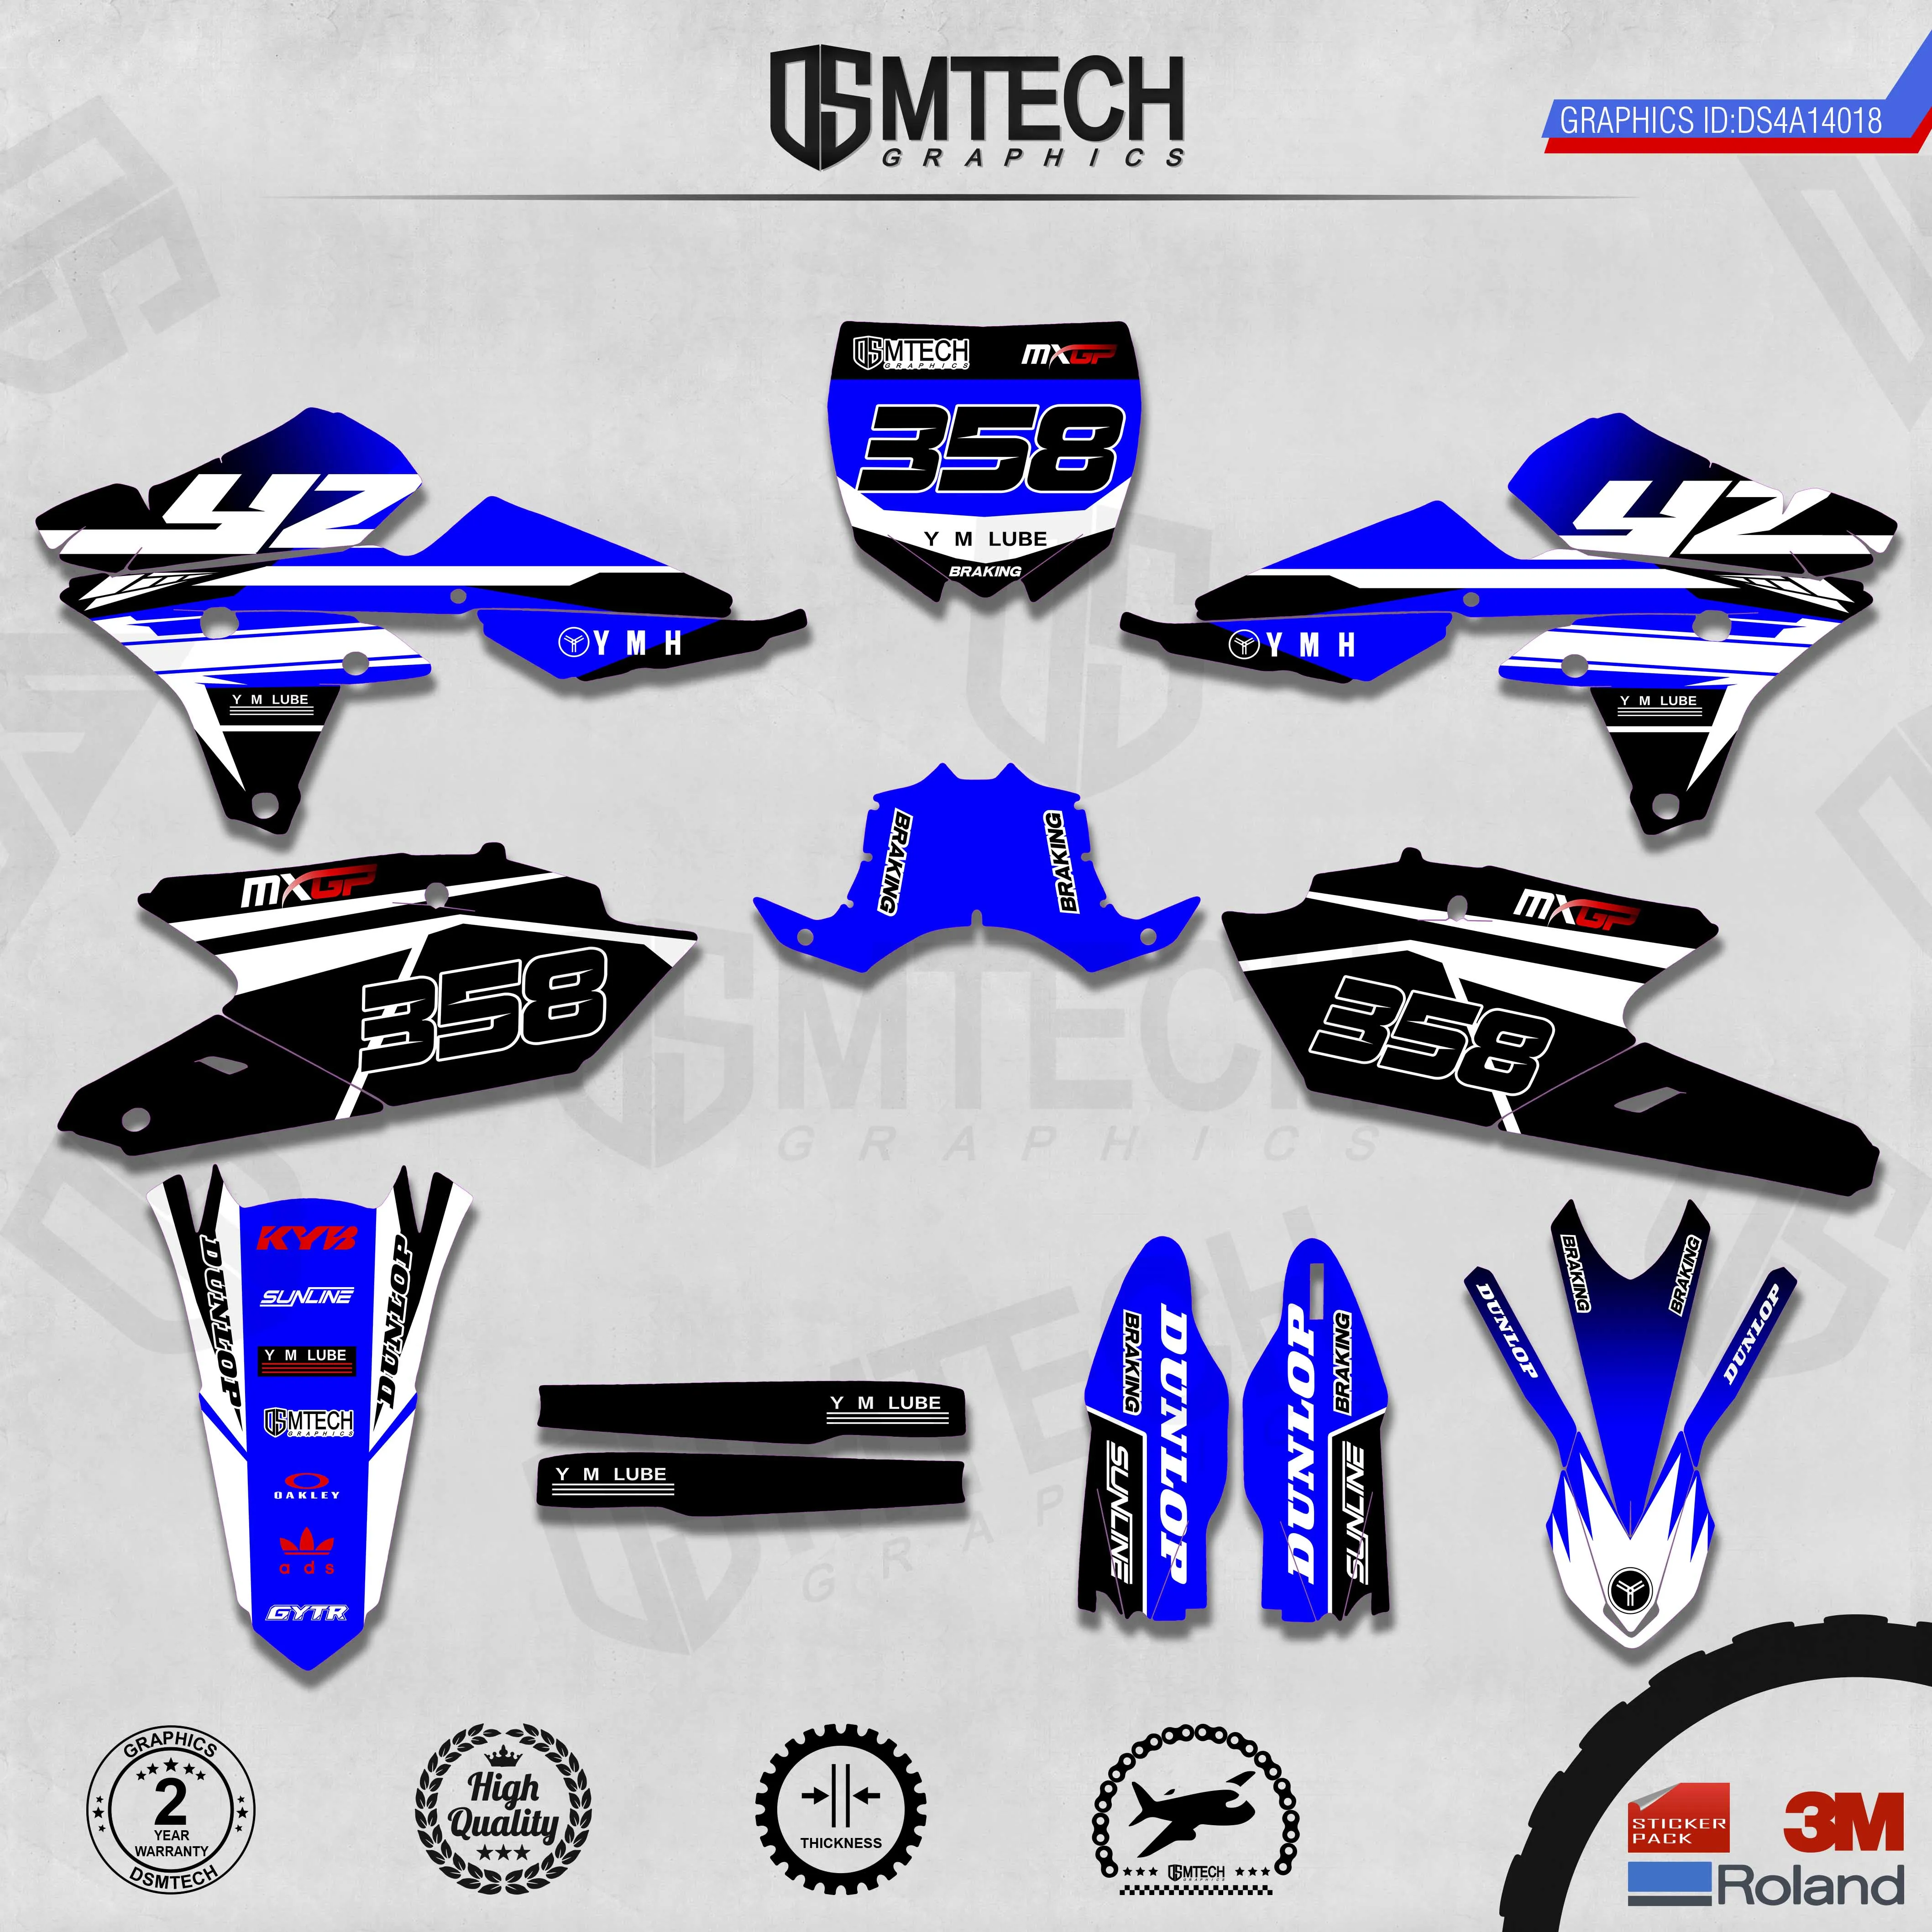 DSMTECH Customized Team Graphics Backgrounds Decals 3M Custom Stickers For 14-18 YZ250F 15-19 YZ250FX WRF250 14-17 YZ450F  018